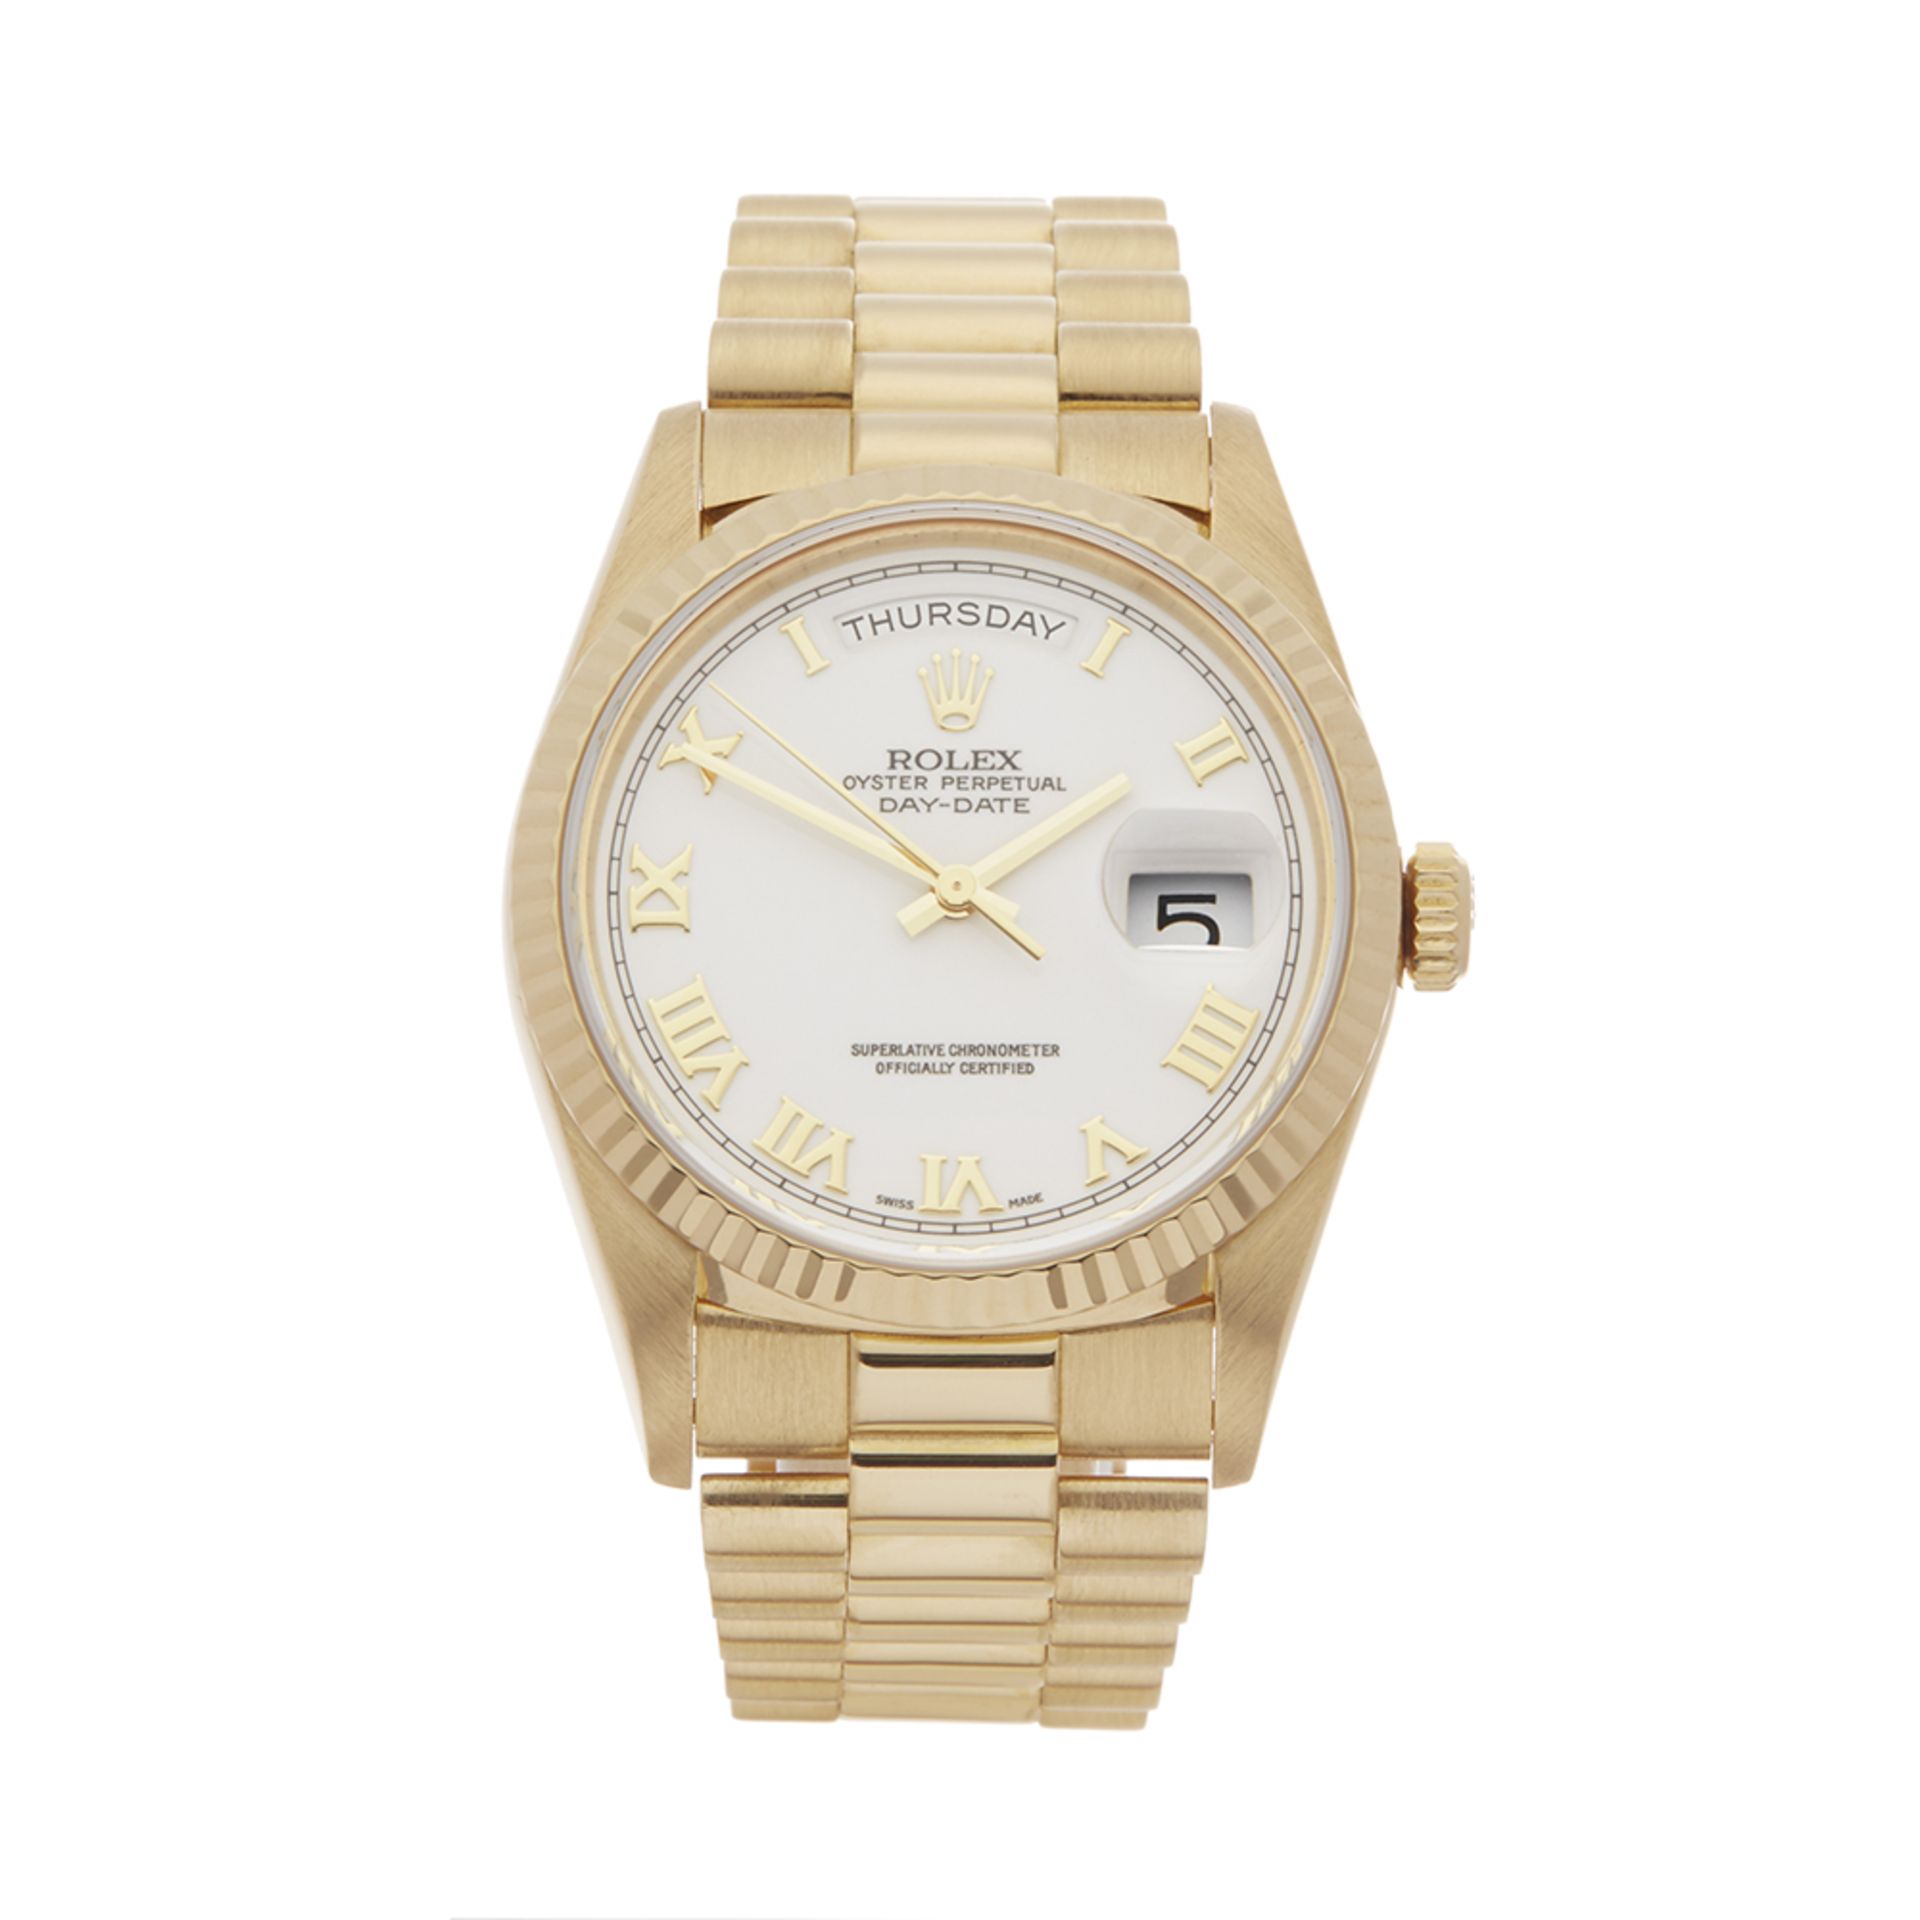 1991 Rolex Day-Date 36 18k Yellow Gold - 18238 - Image 6 of 6